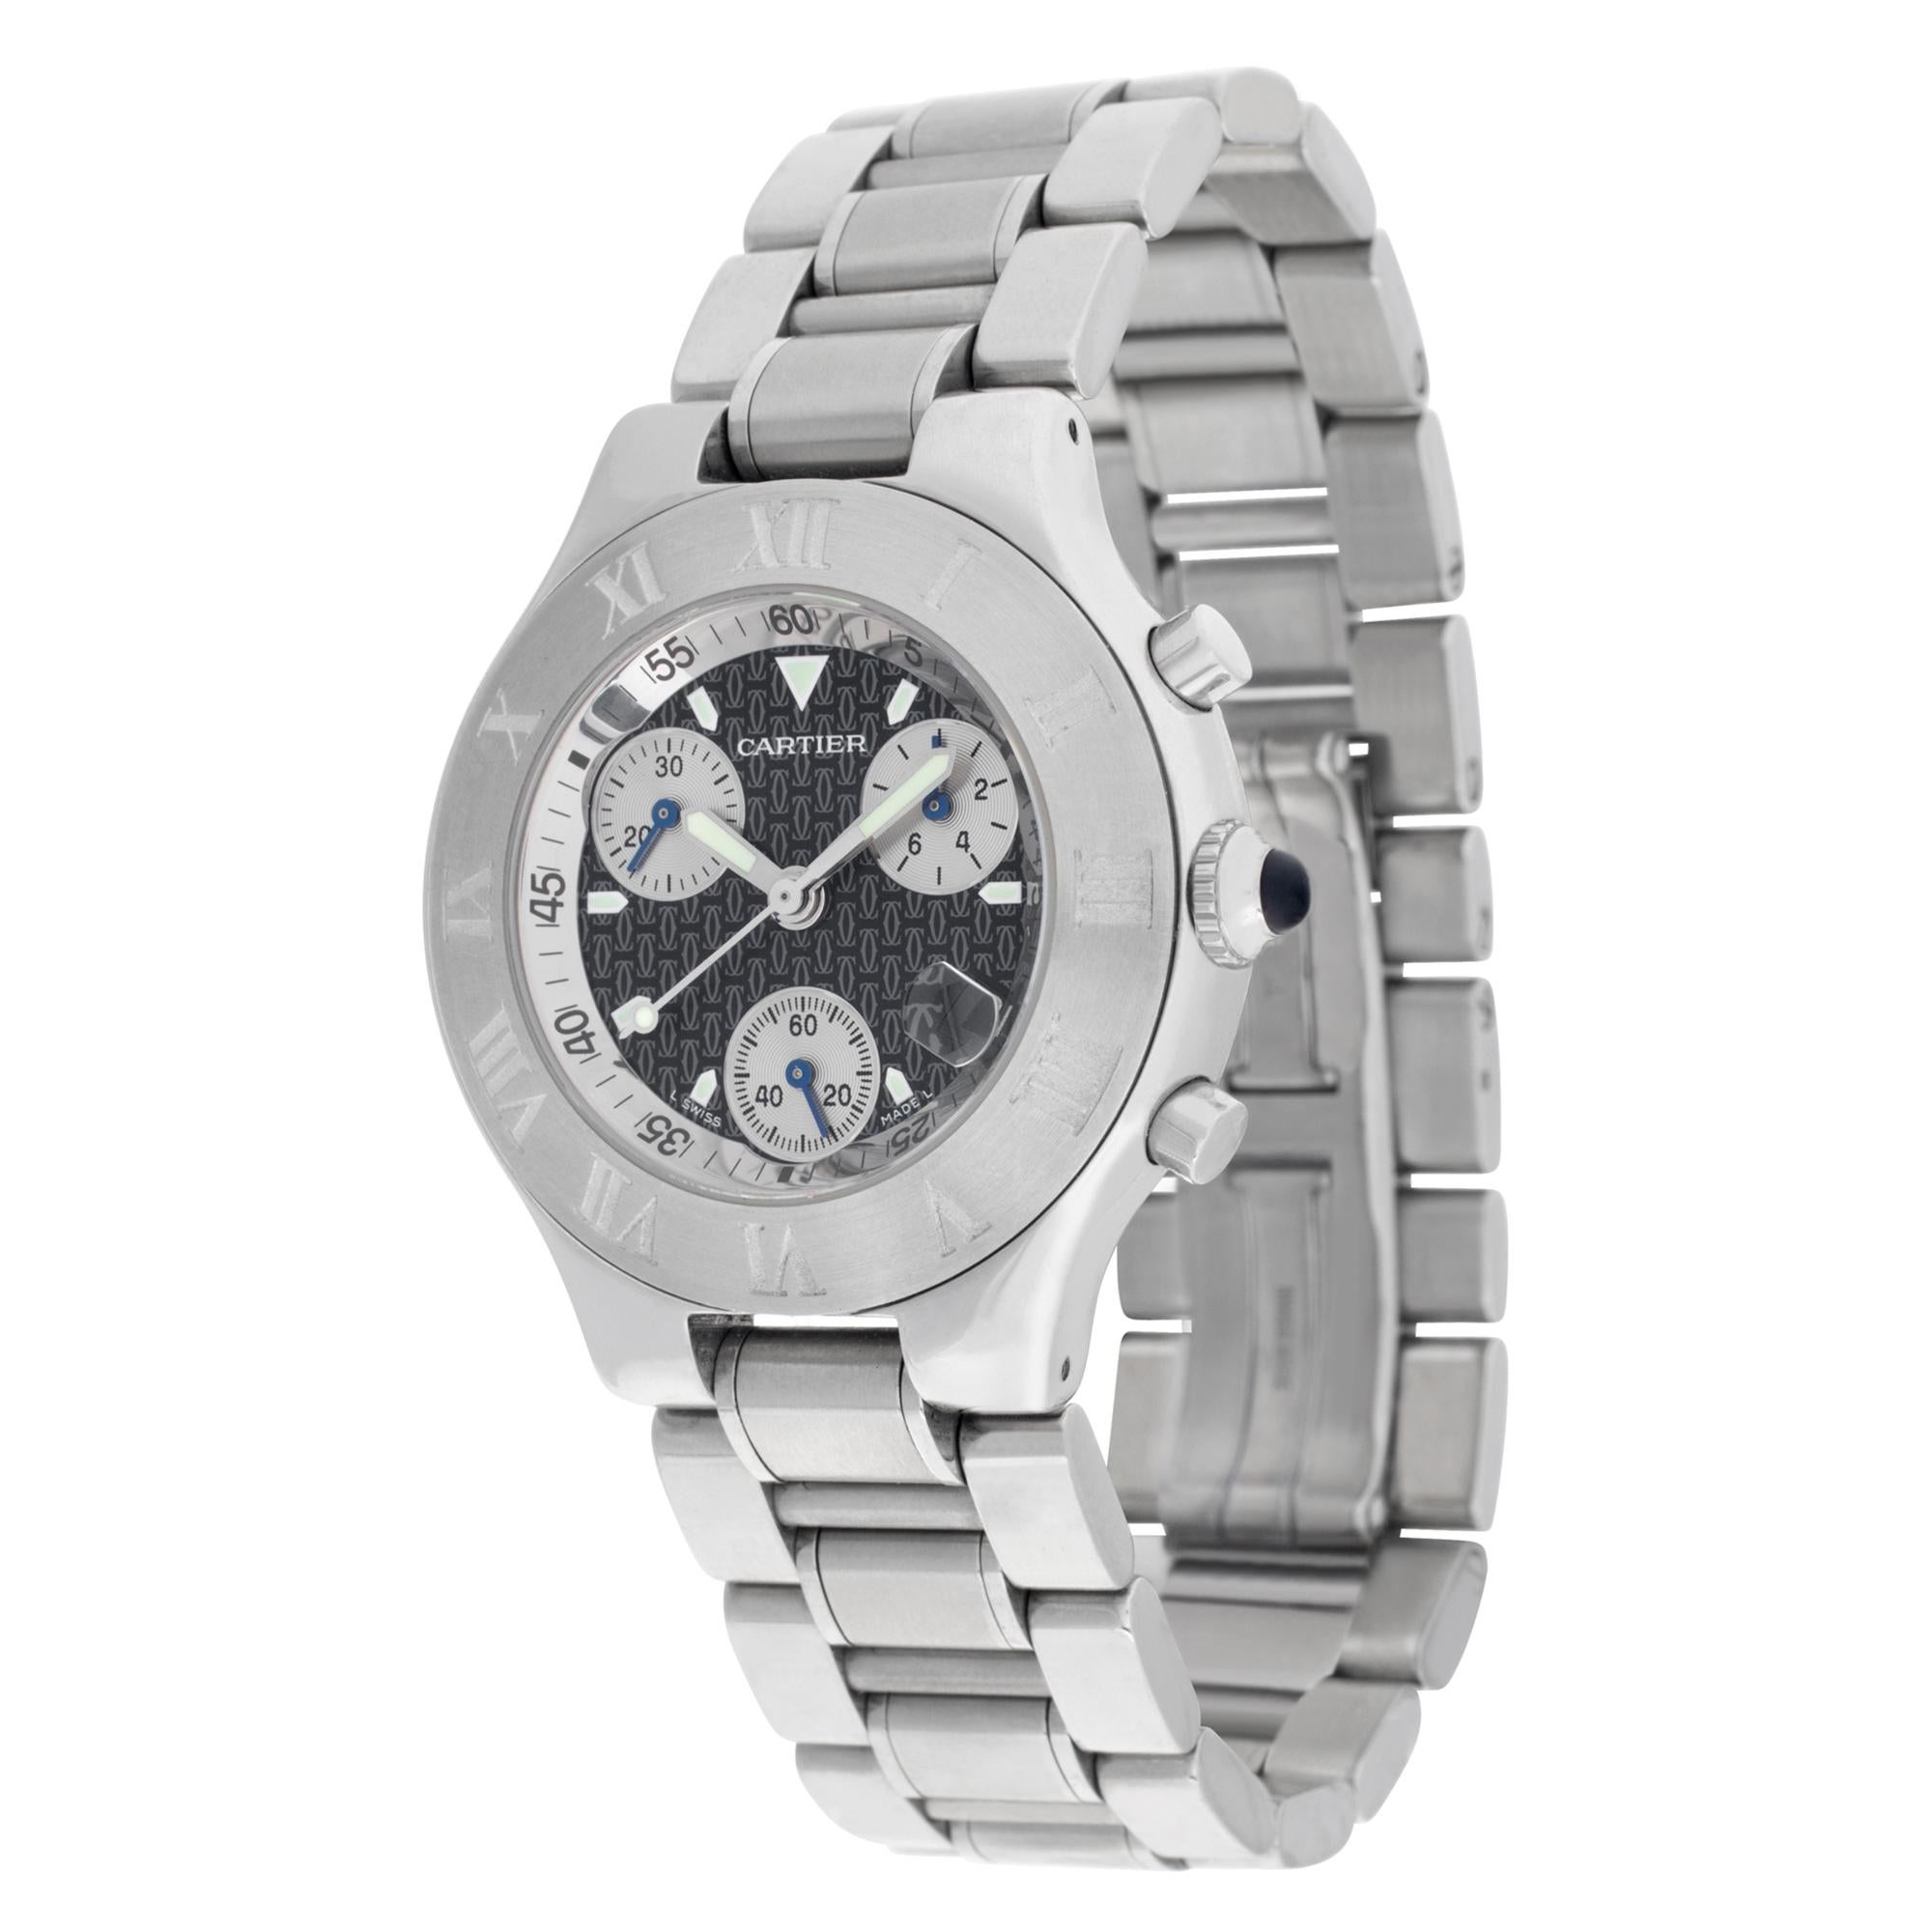 Cartier Chronoscaph 21 in stainless steel. Quartz w/ subseconds, date and chronograph. 38 mm case size. Ref W10172t2. Fine Pre-owned Cartier Watch.

Certified preowned Sport Cartier Chronoscaph 21 W10172t2 watch is made out of Stainless steel on a